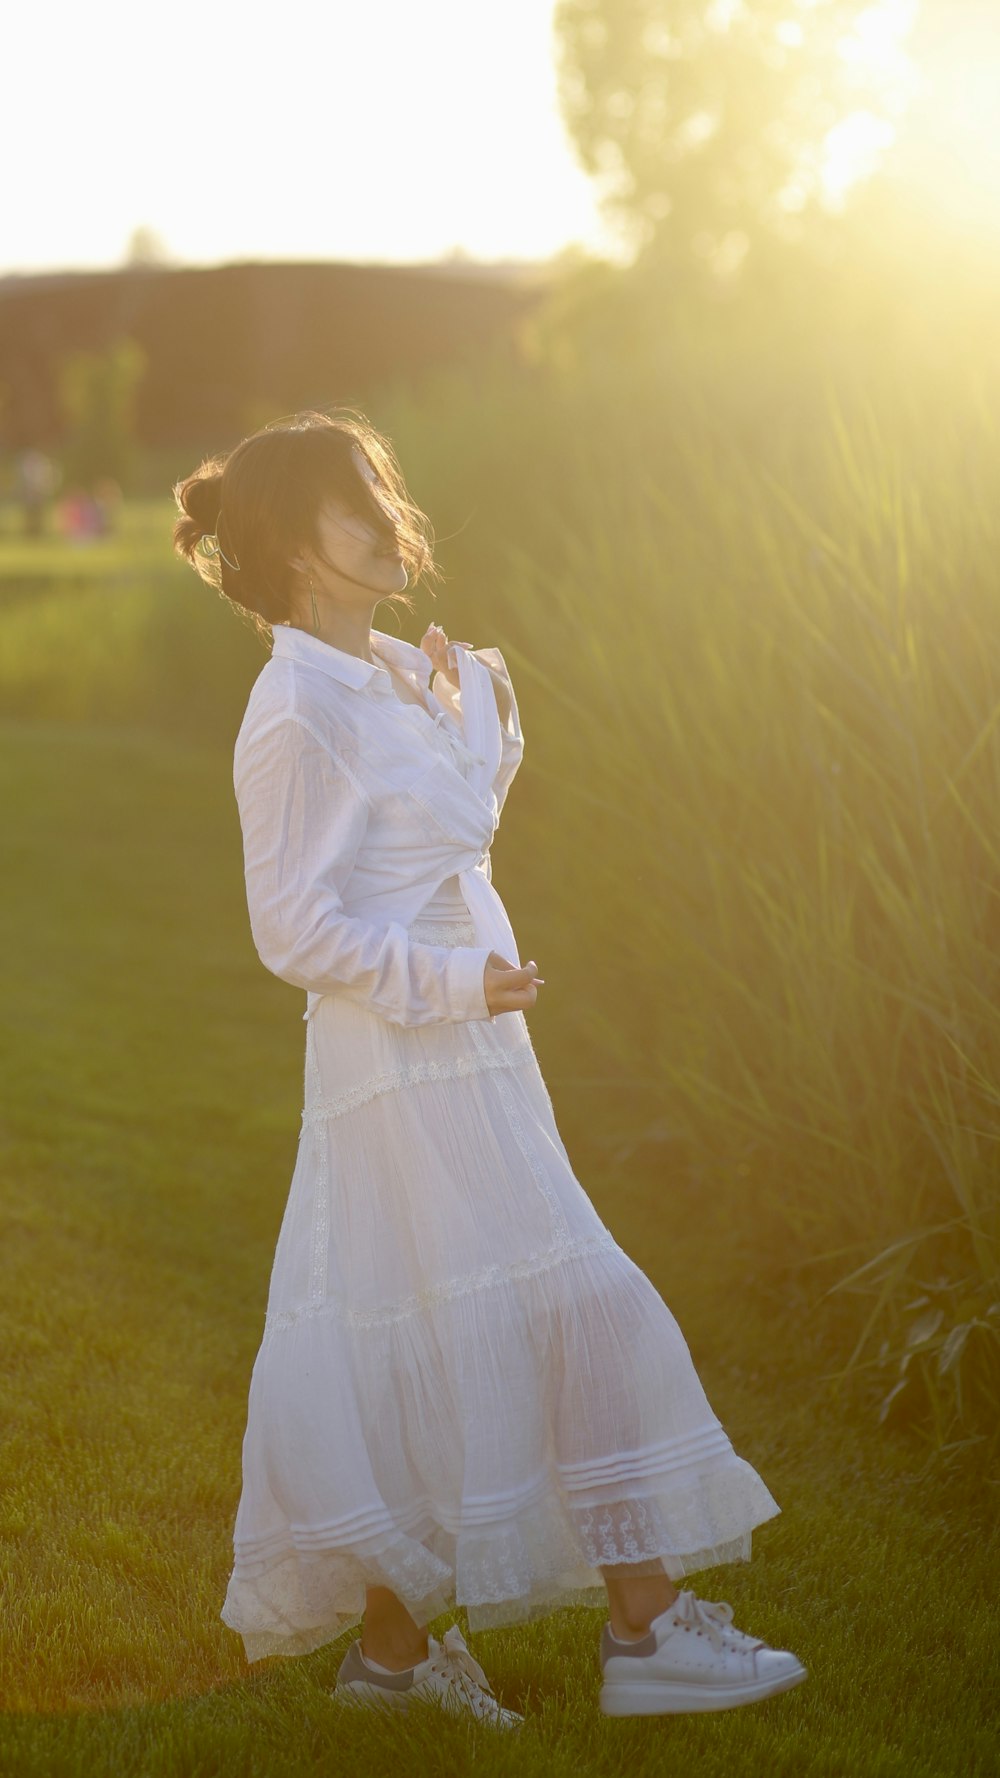 a person in a white dress